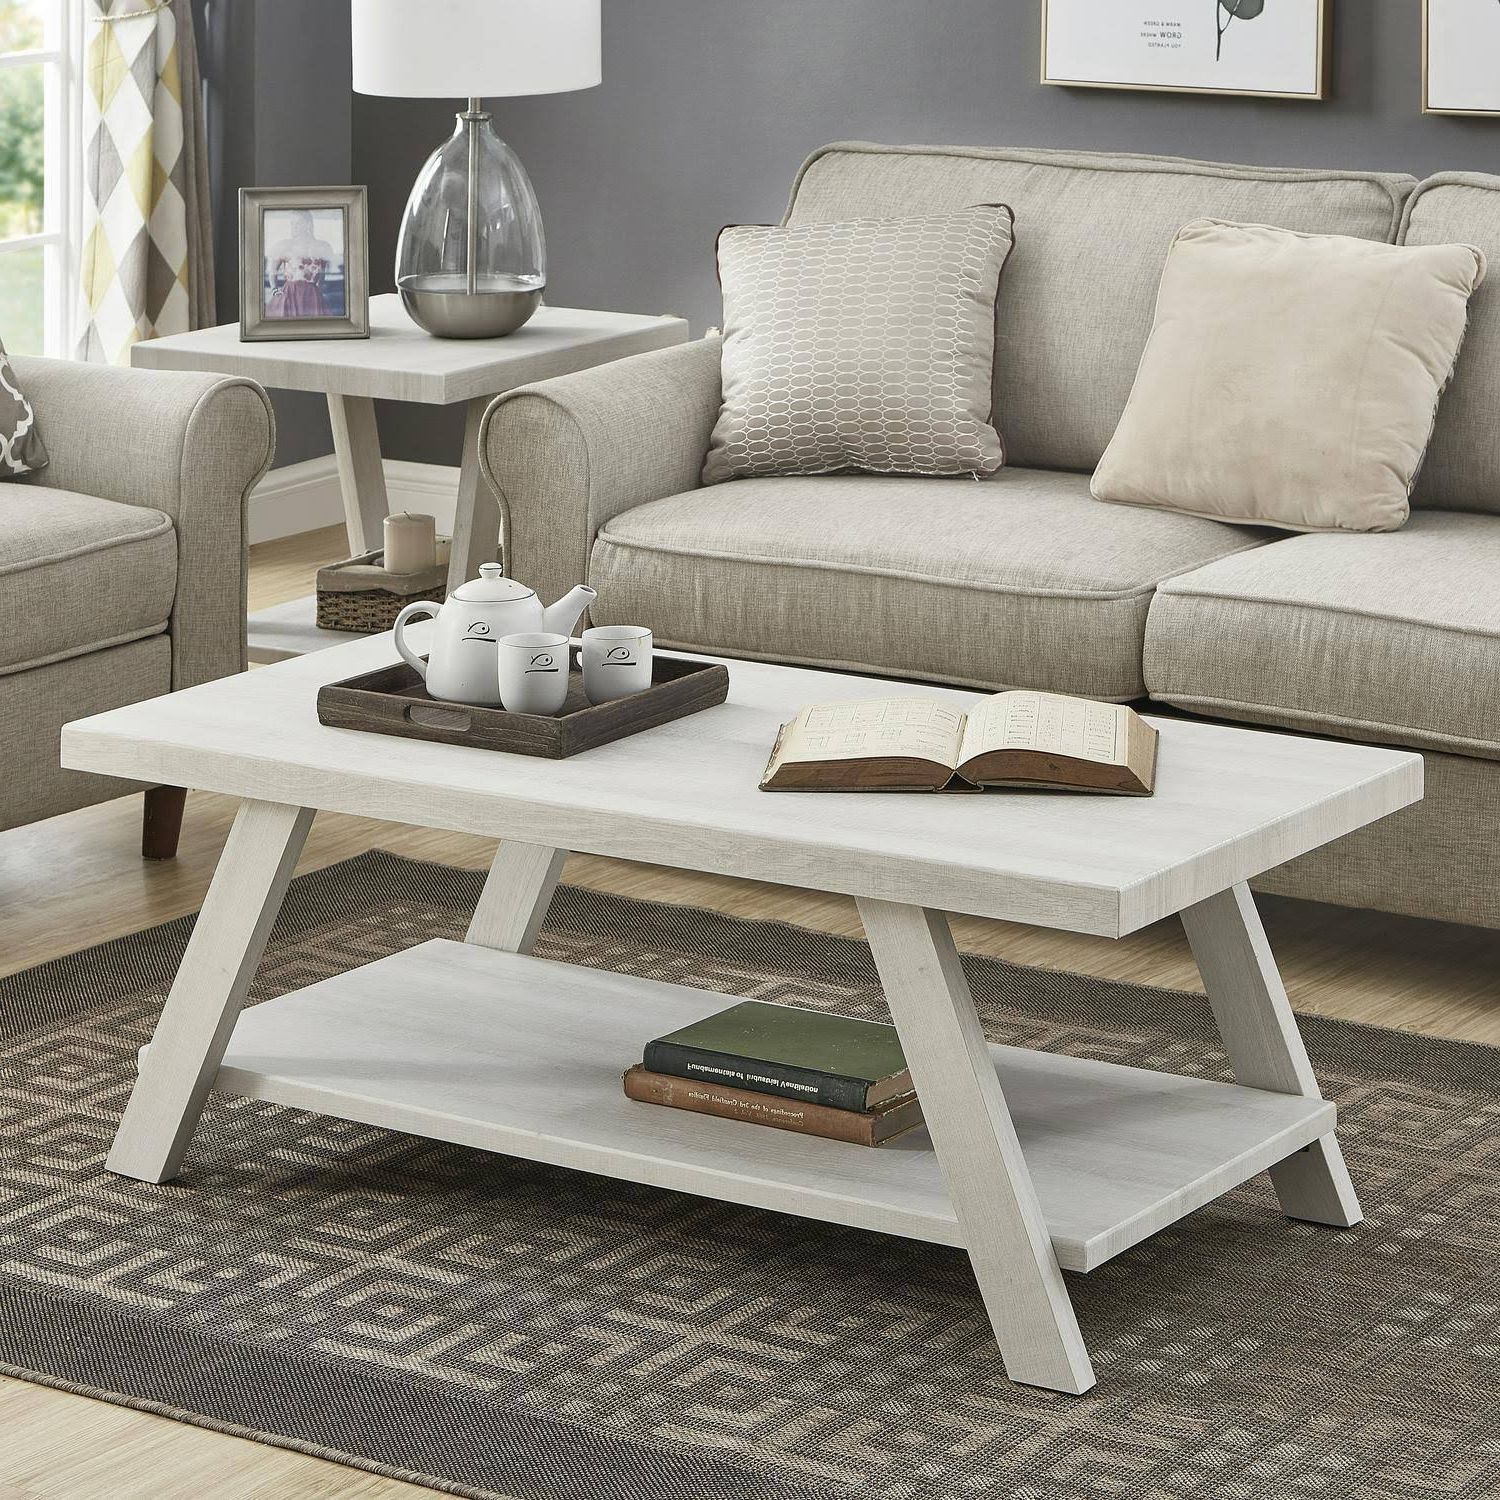 Pemberly Row Replicated Wood Coffee Tables With Best And Newest The Gray Barn Cedar Ridge Contemporary Replicated Wood Shelf Coffee (View 3 of 15)